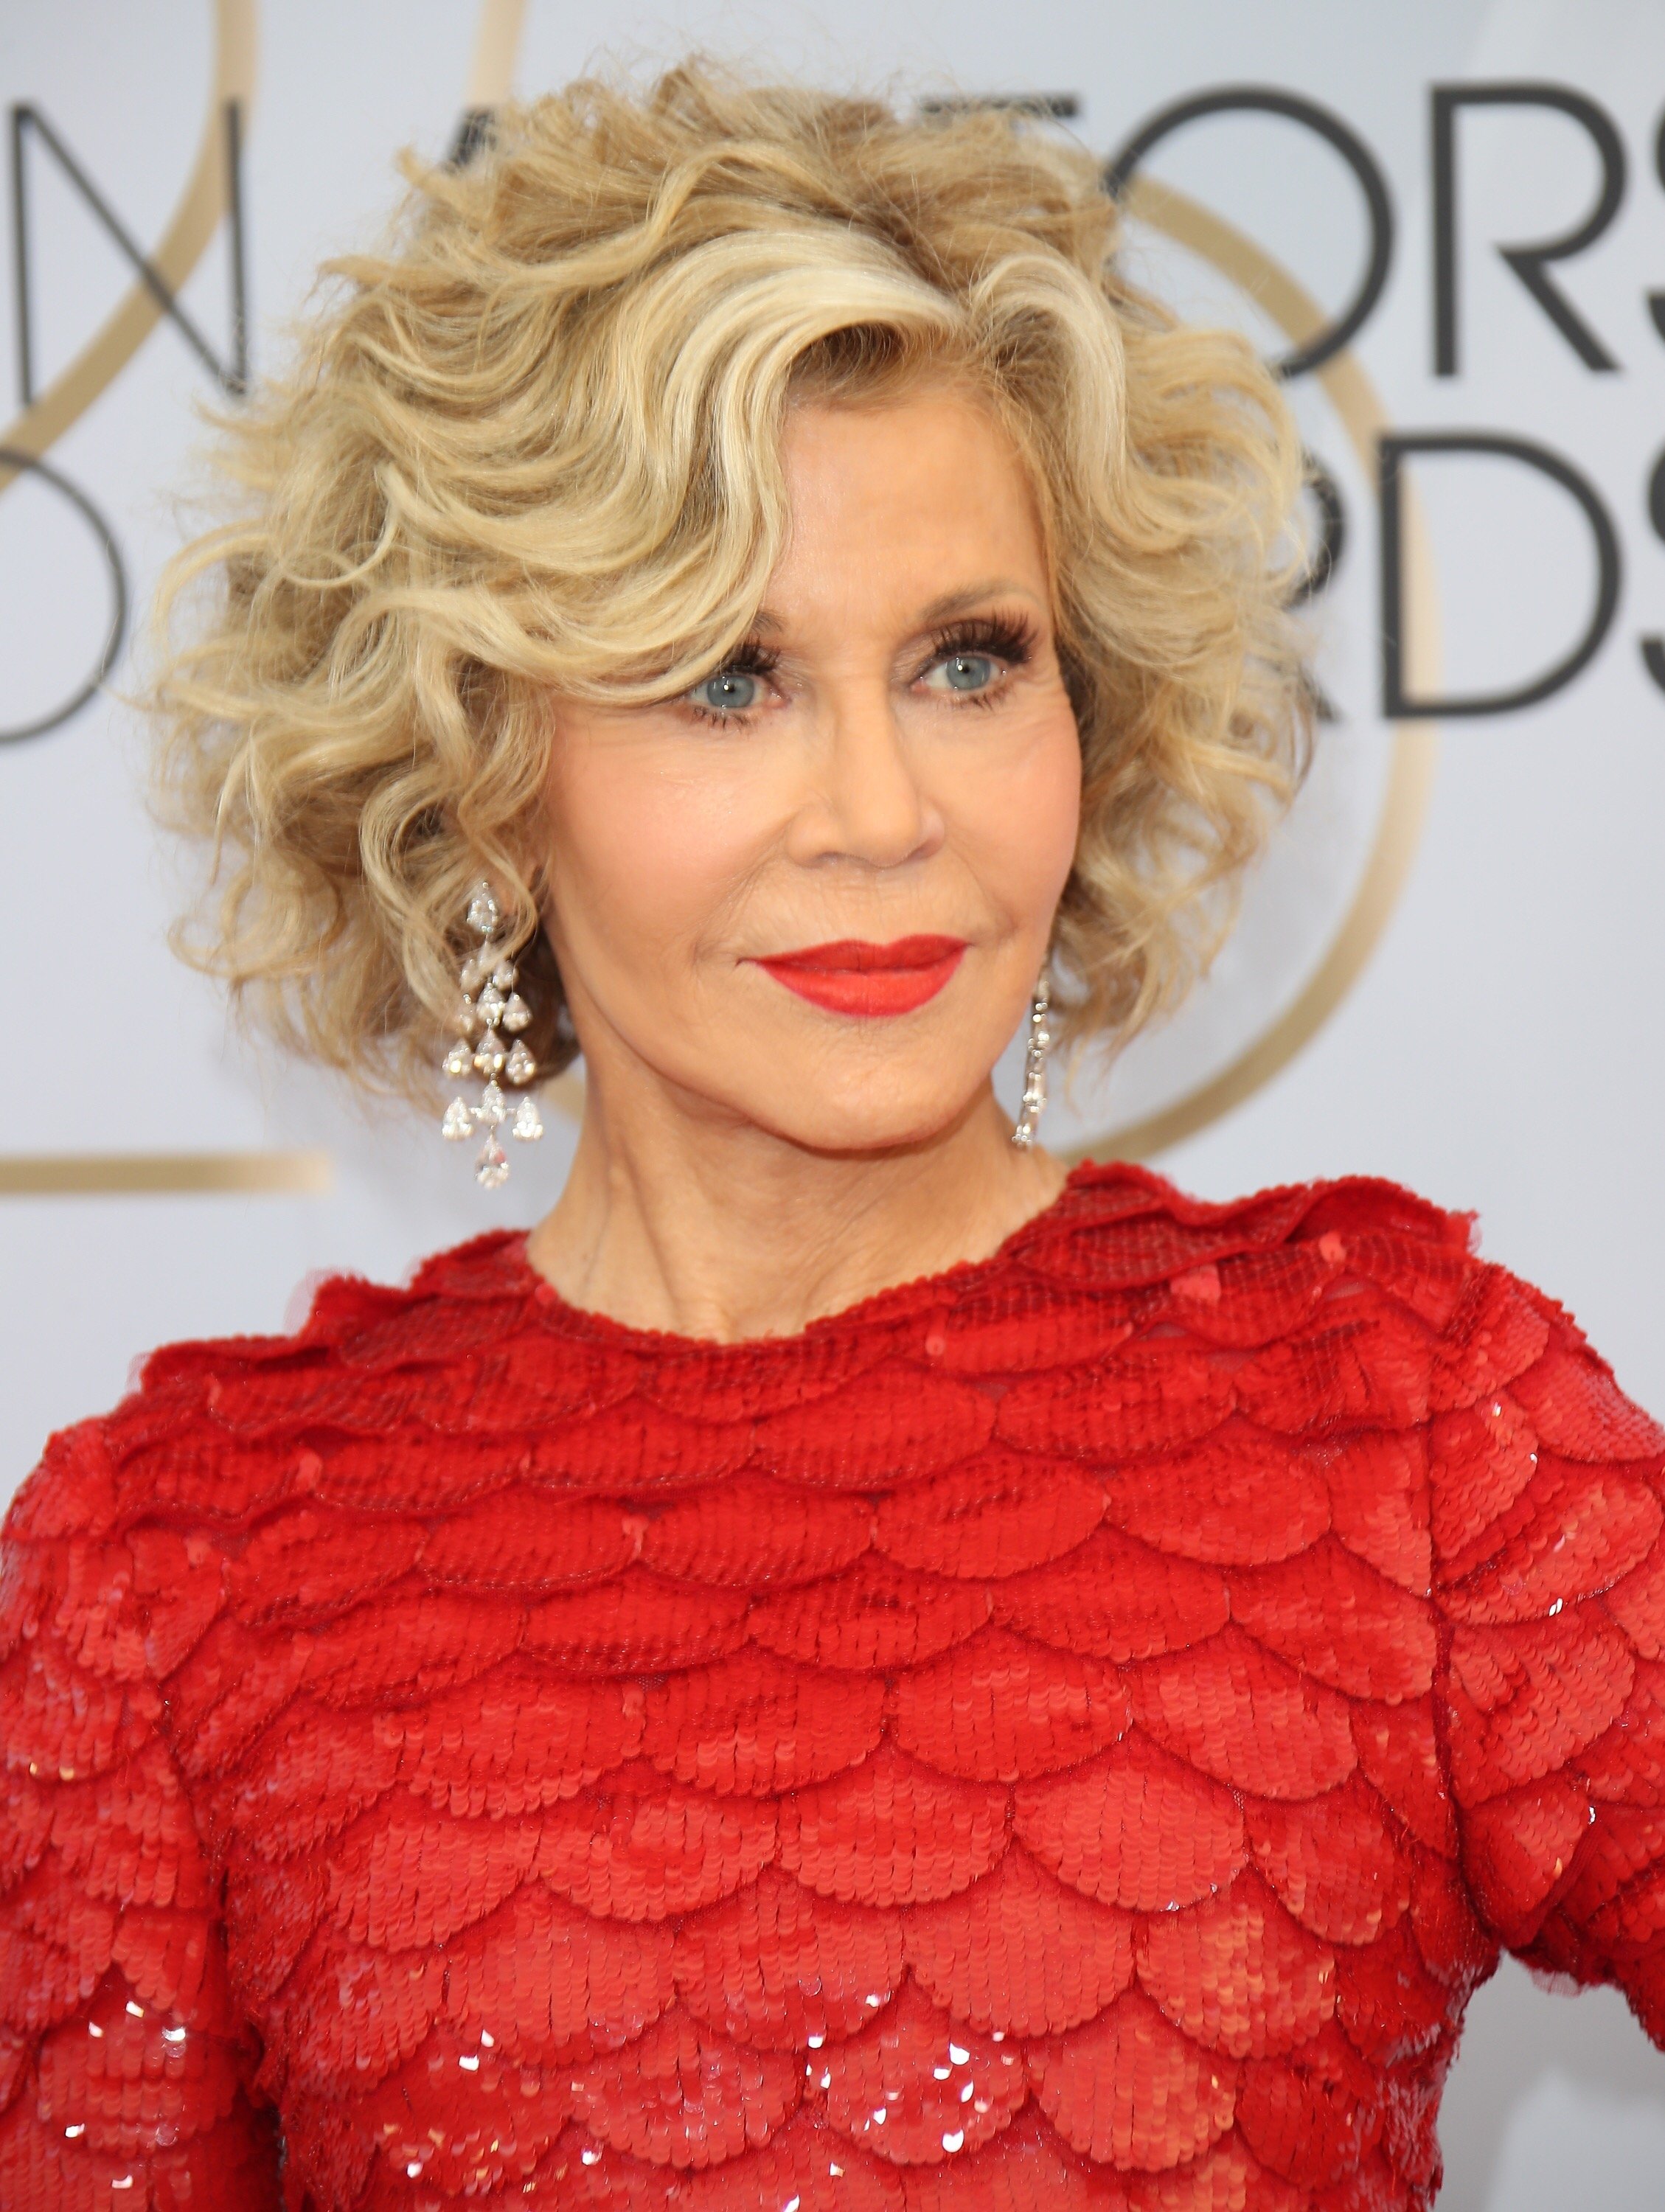 Jane Fonda at the 25th Annual Screen Actors Guild Awards in California on January 27, 2019 | Source: Getty Images 